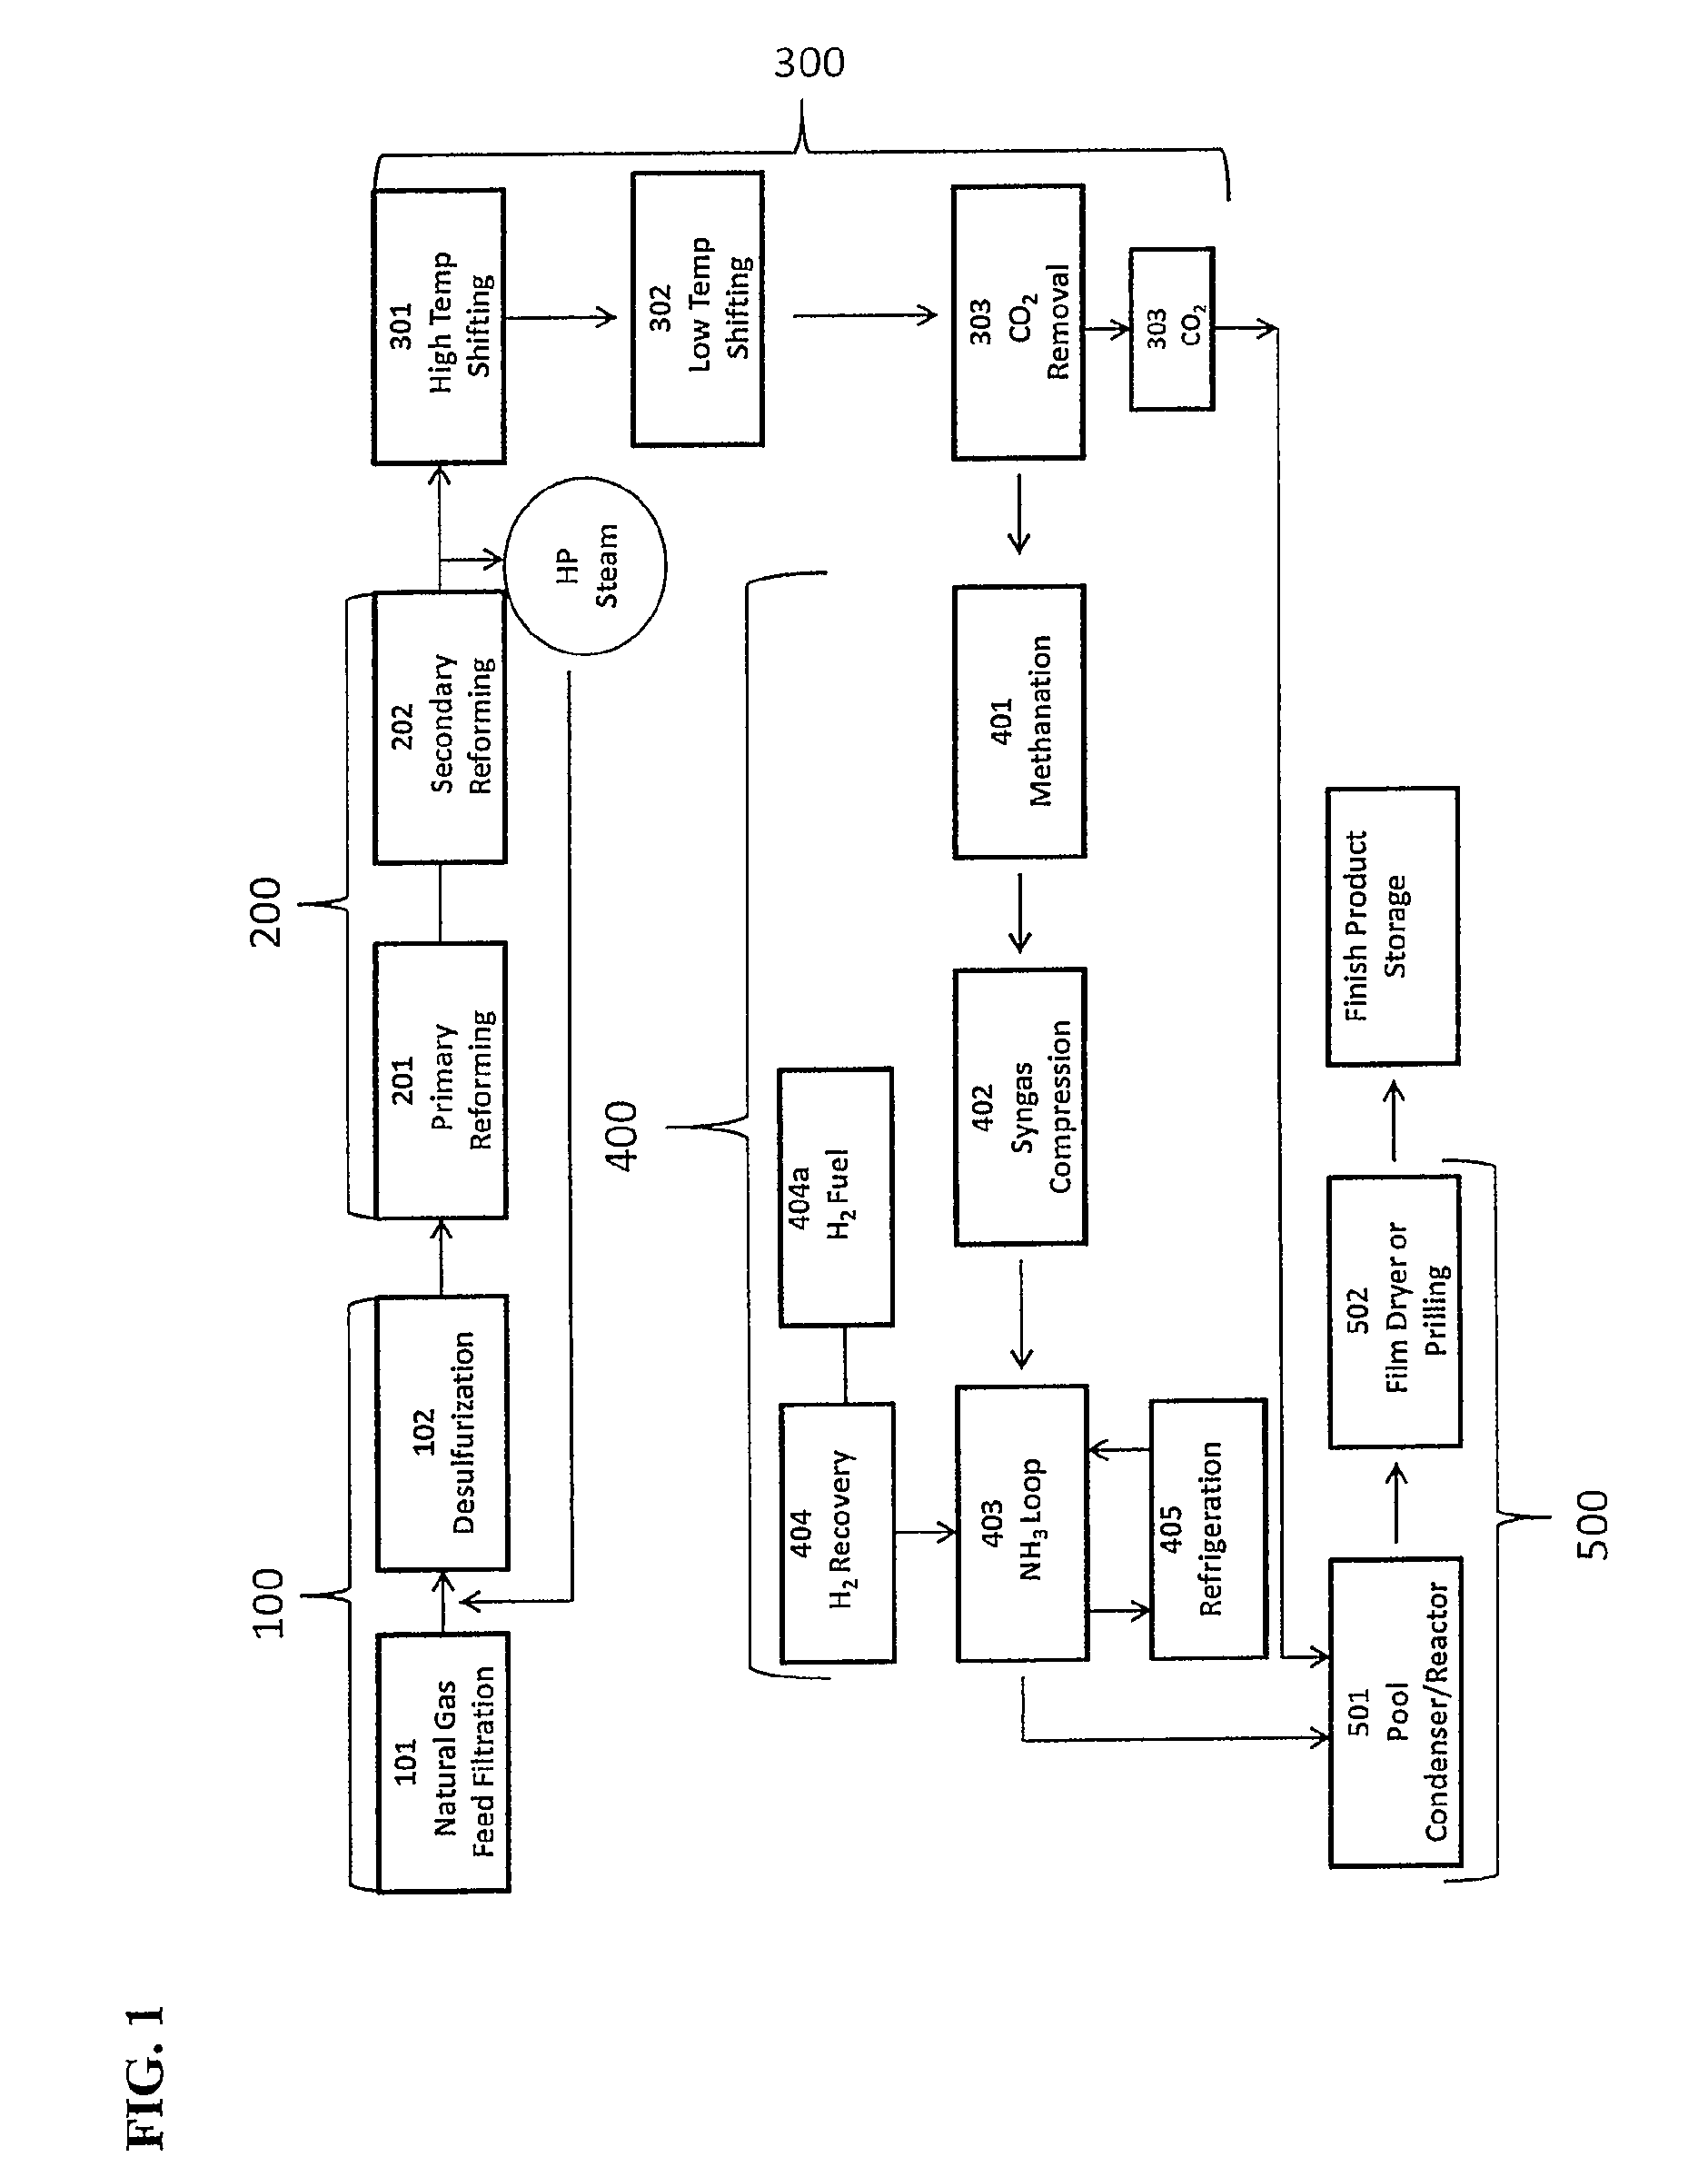 Modularized system and method for urea production using stranded natural gas